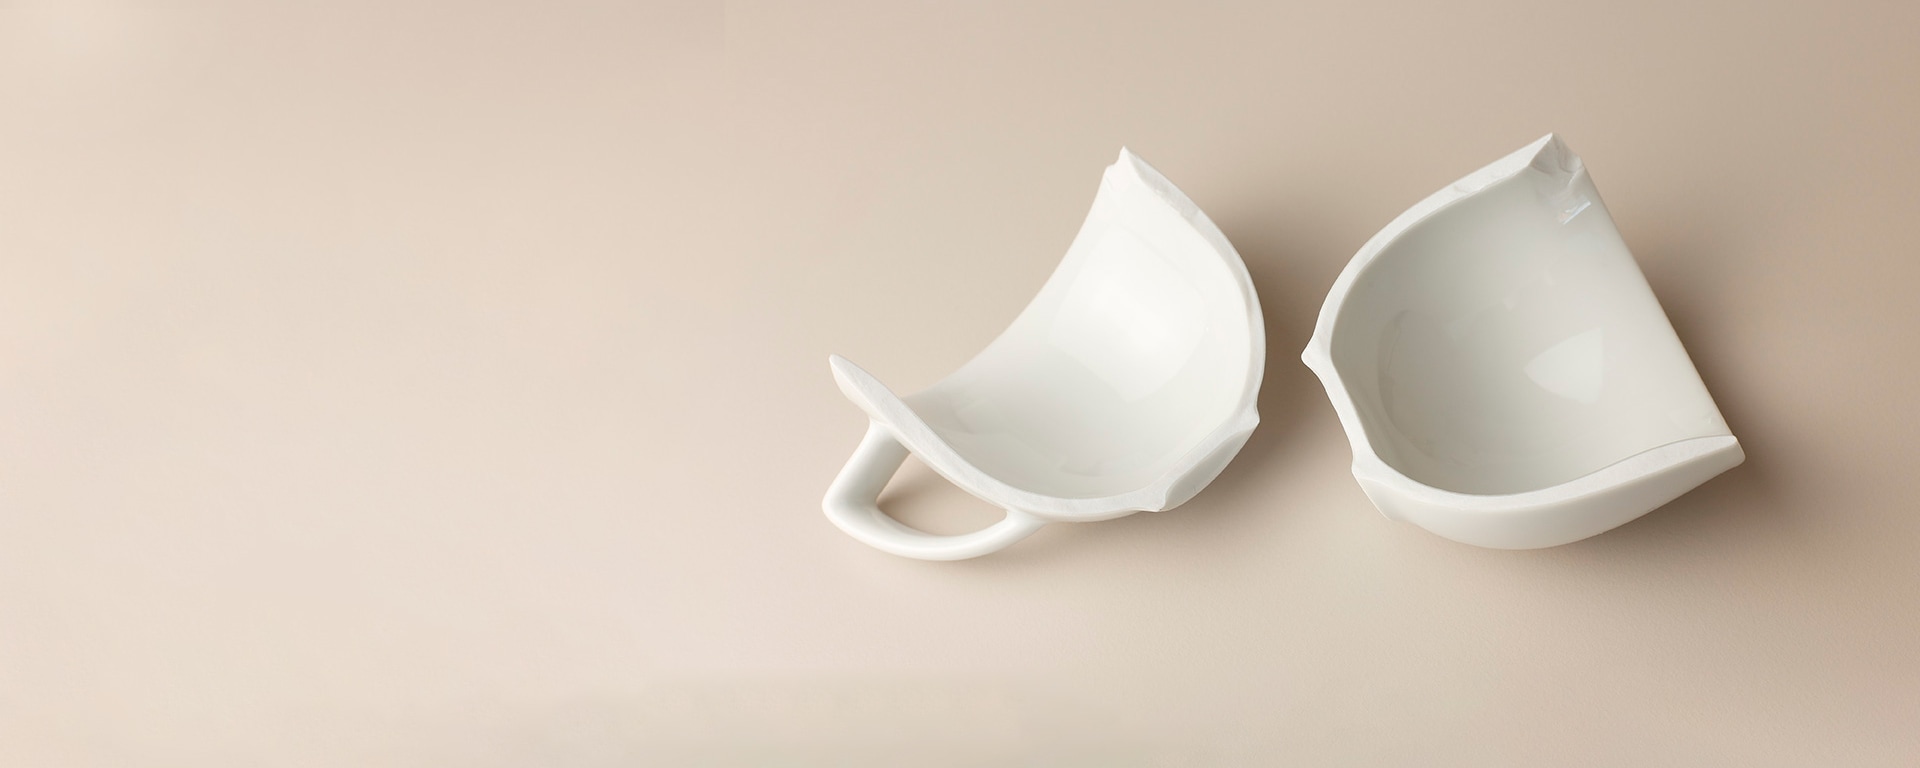 Two halves of a white broken cup lie on a bright surface.